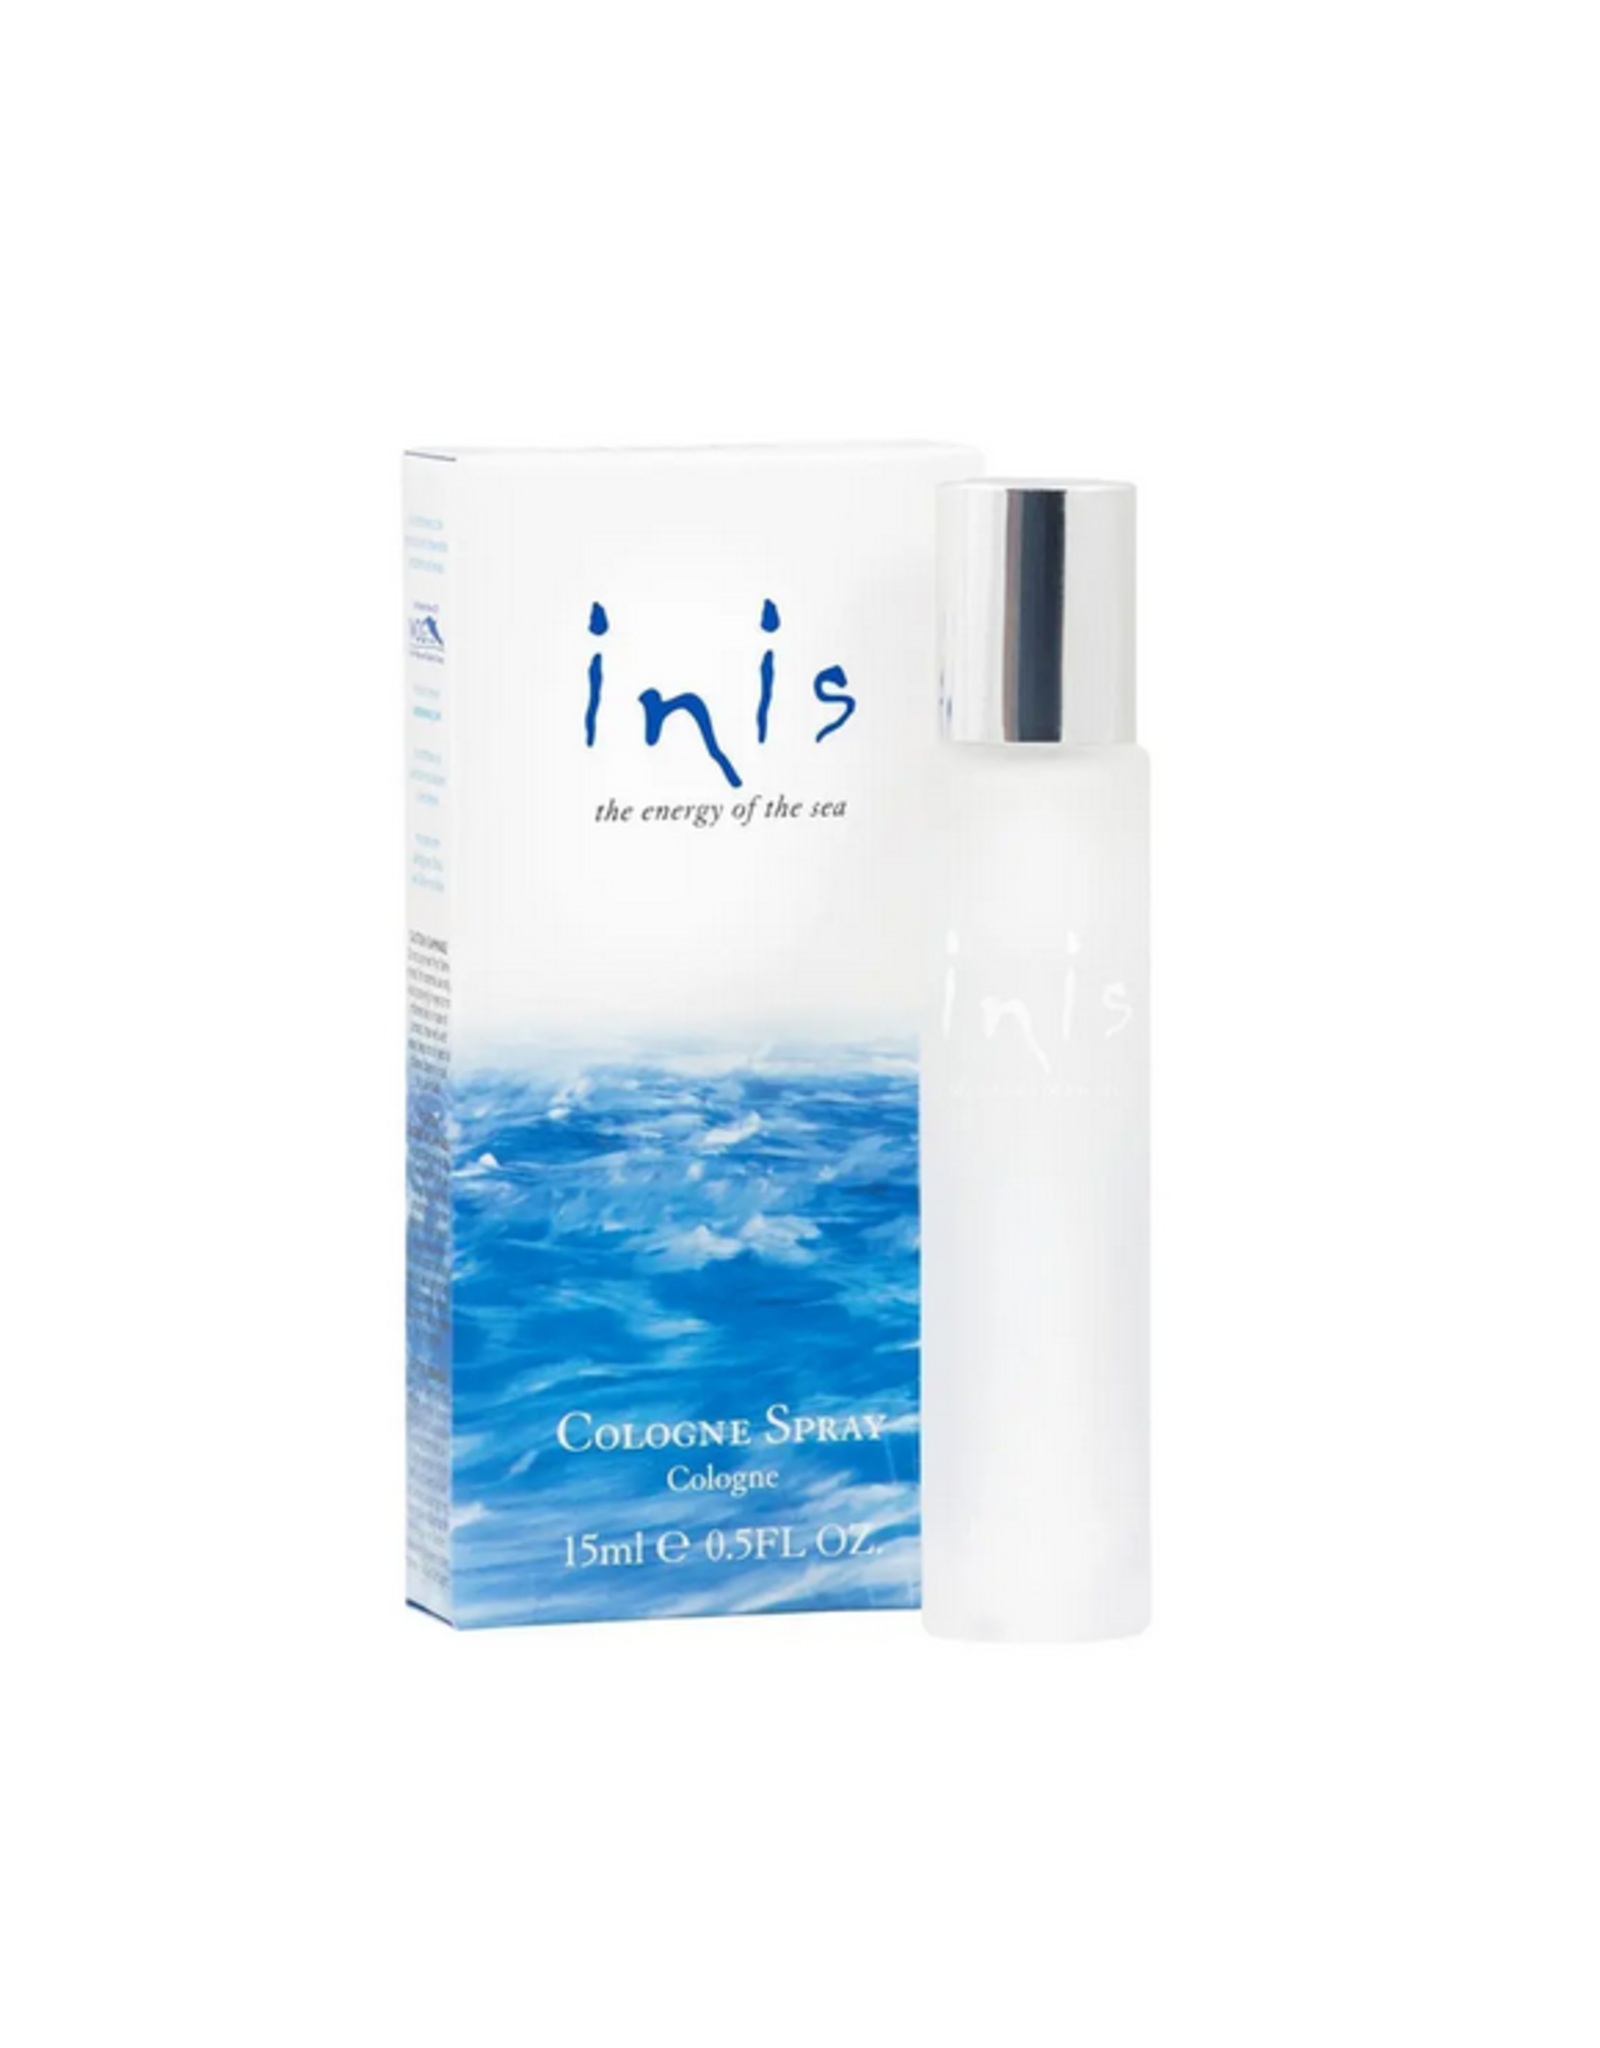 Inis Energy of The Sea Fragrance Diffuser Refill 3.3 fl oz.